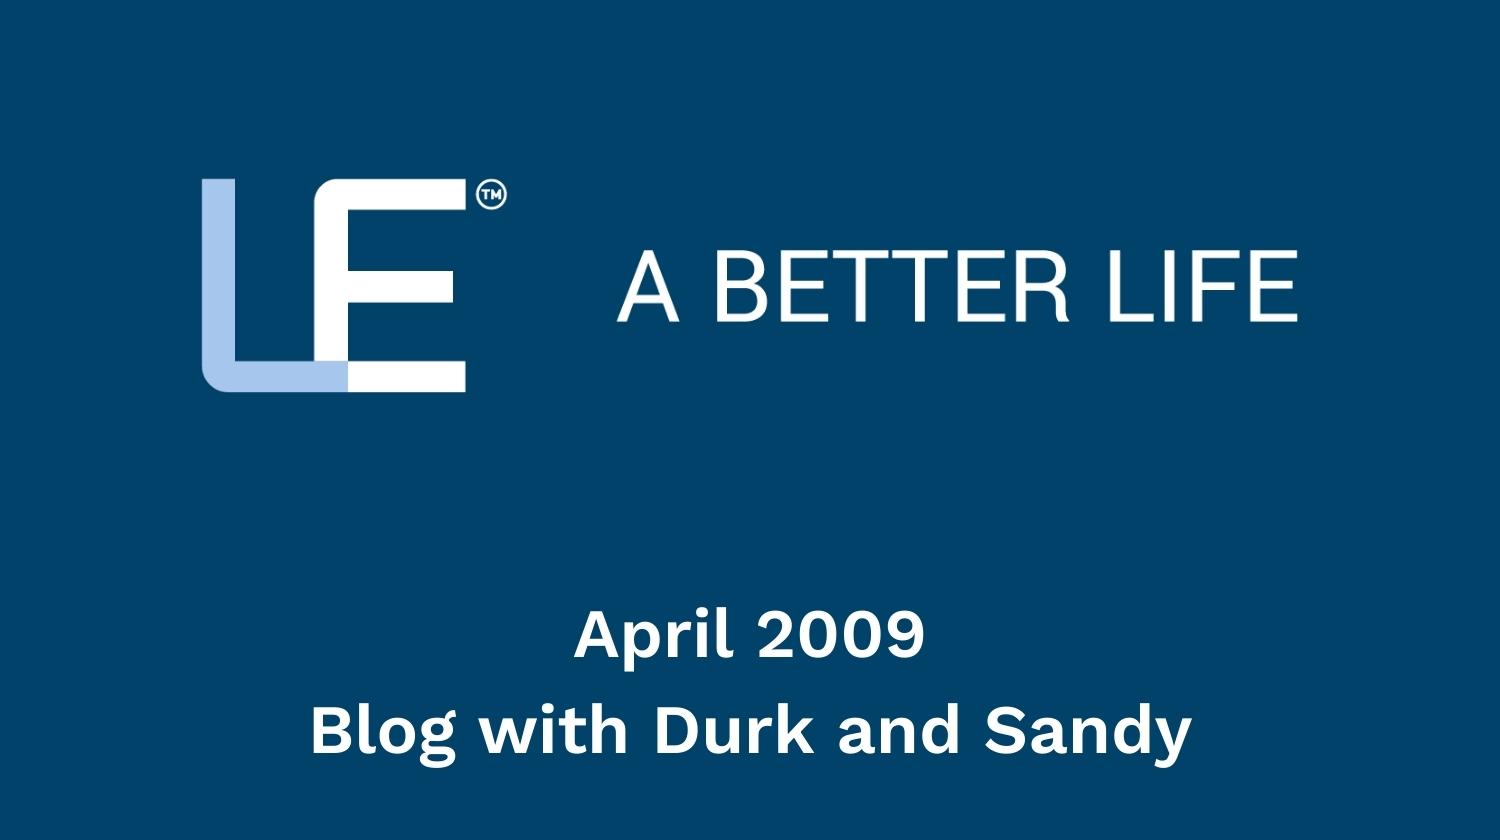 April 2009 Blog with Durk and Sandy